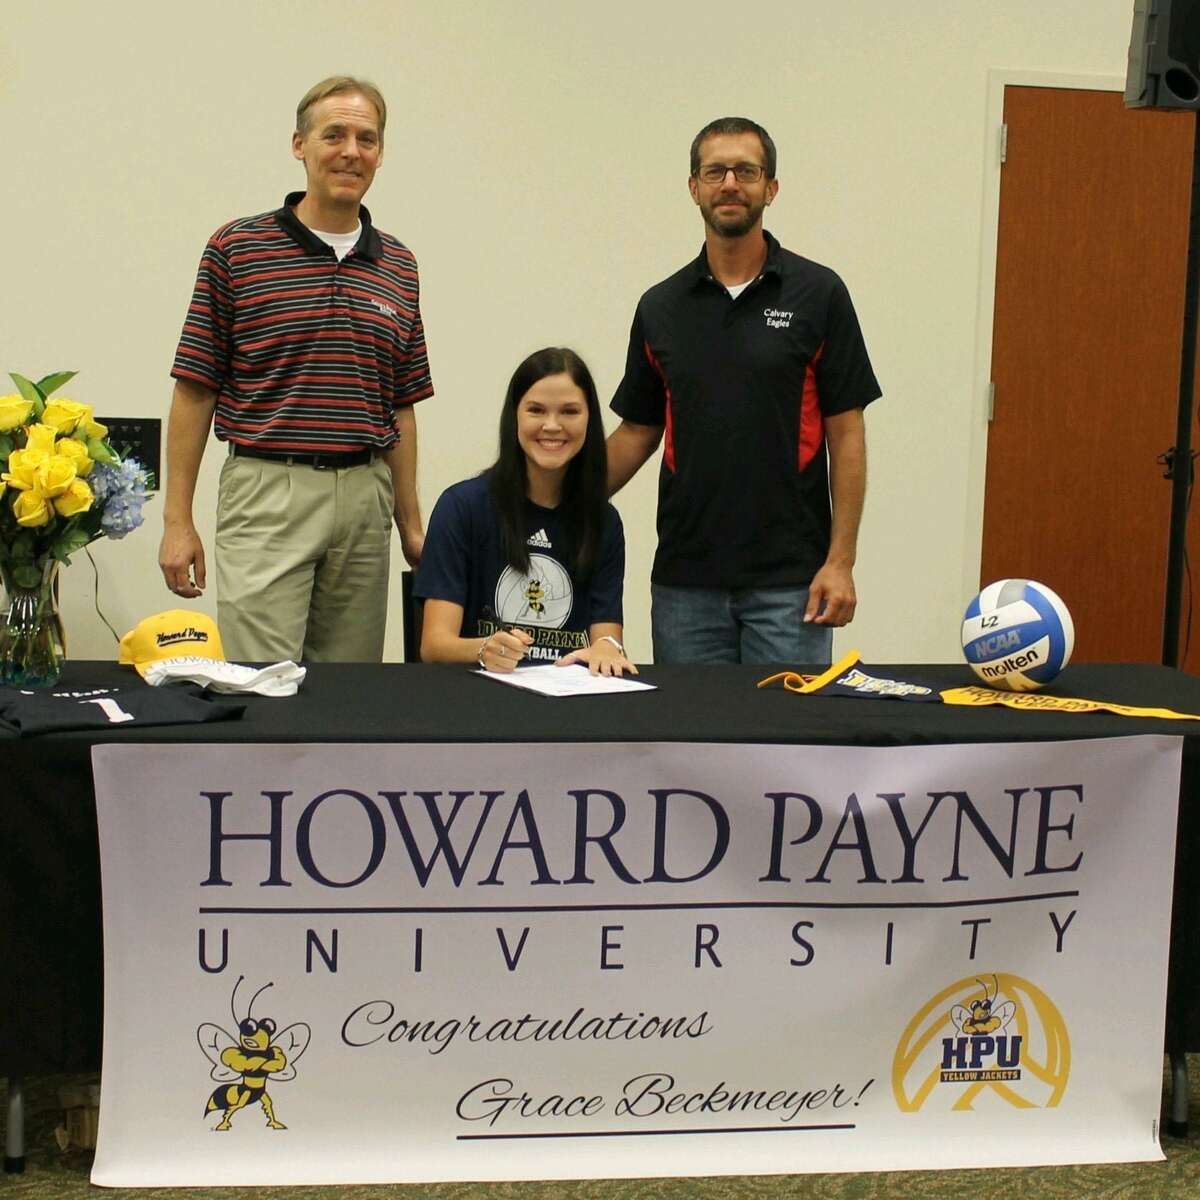 Grace Beckmeyer, a 2020 graduate of Calvary Baptist School, signed to play volleyball for Howard Payne University recently. From coach Mike Riggens “I enjoyed coaching Grace these last two years. Always eager to learn ways to improve her skills, Grace’s tremendous work ethic resulted in setting the standard for the team. I’m so proud of her accomplishments and look forward to seeing her play at the next level.”